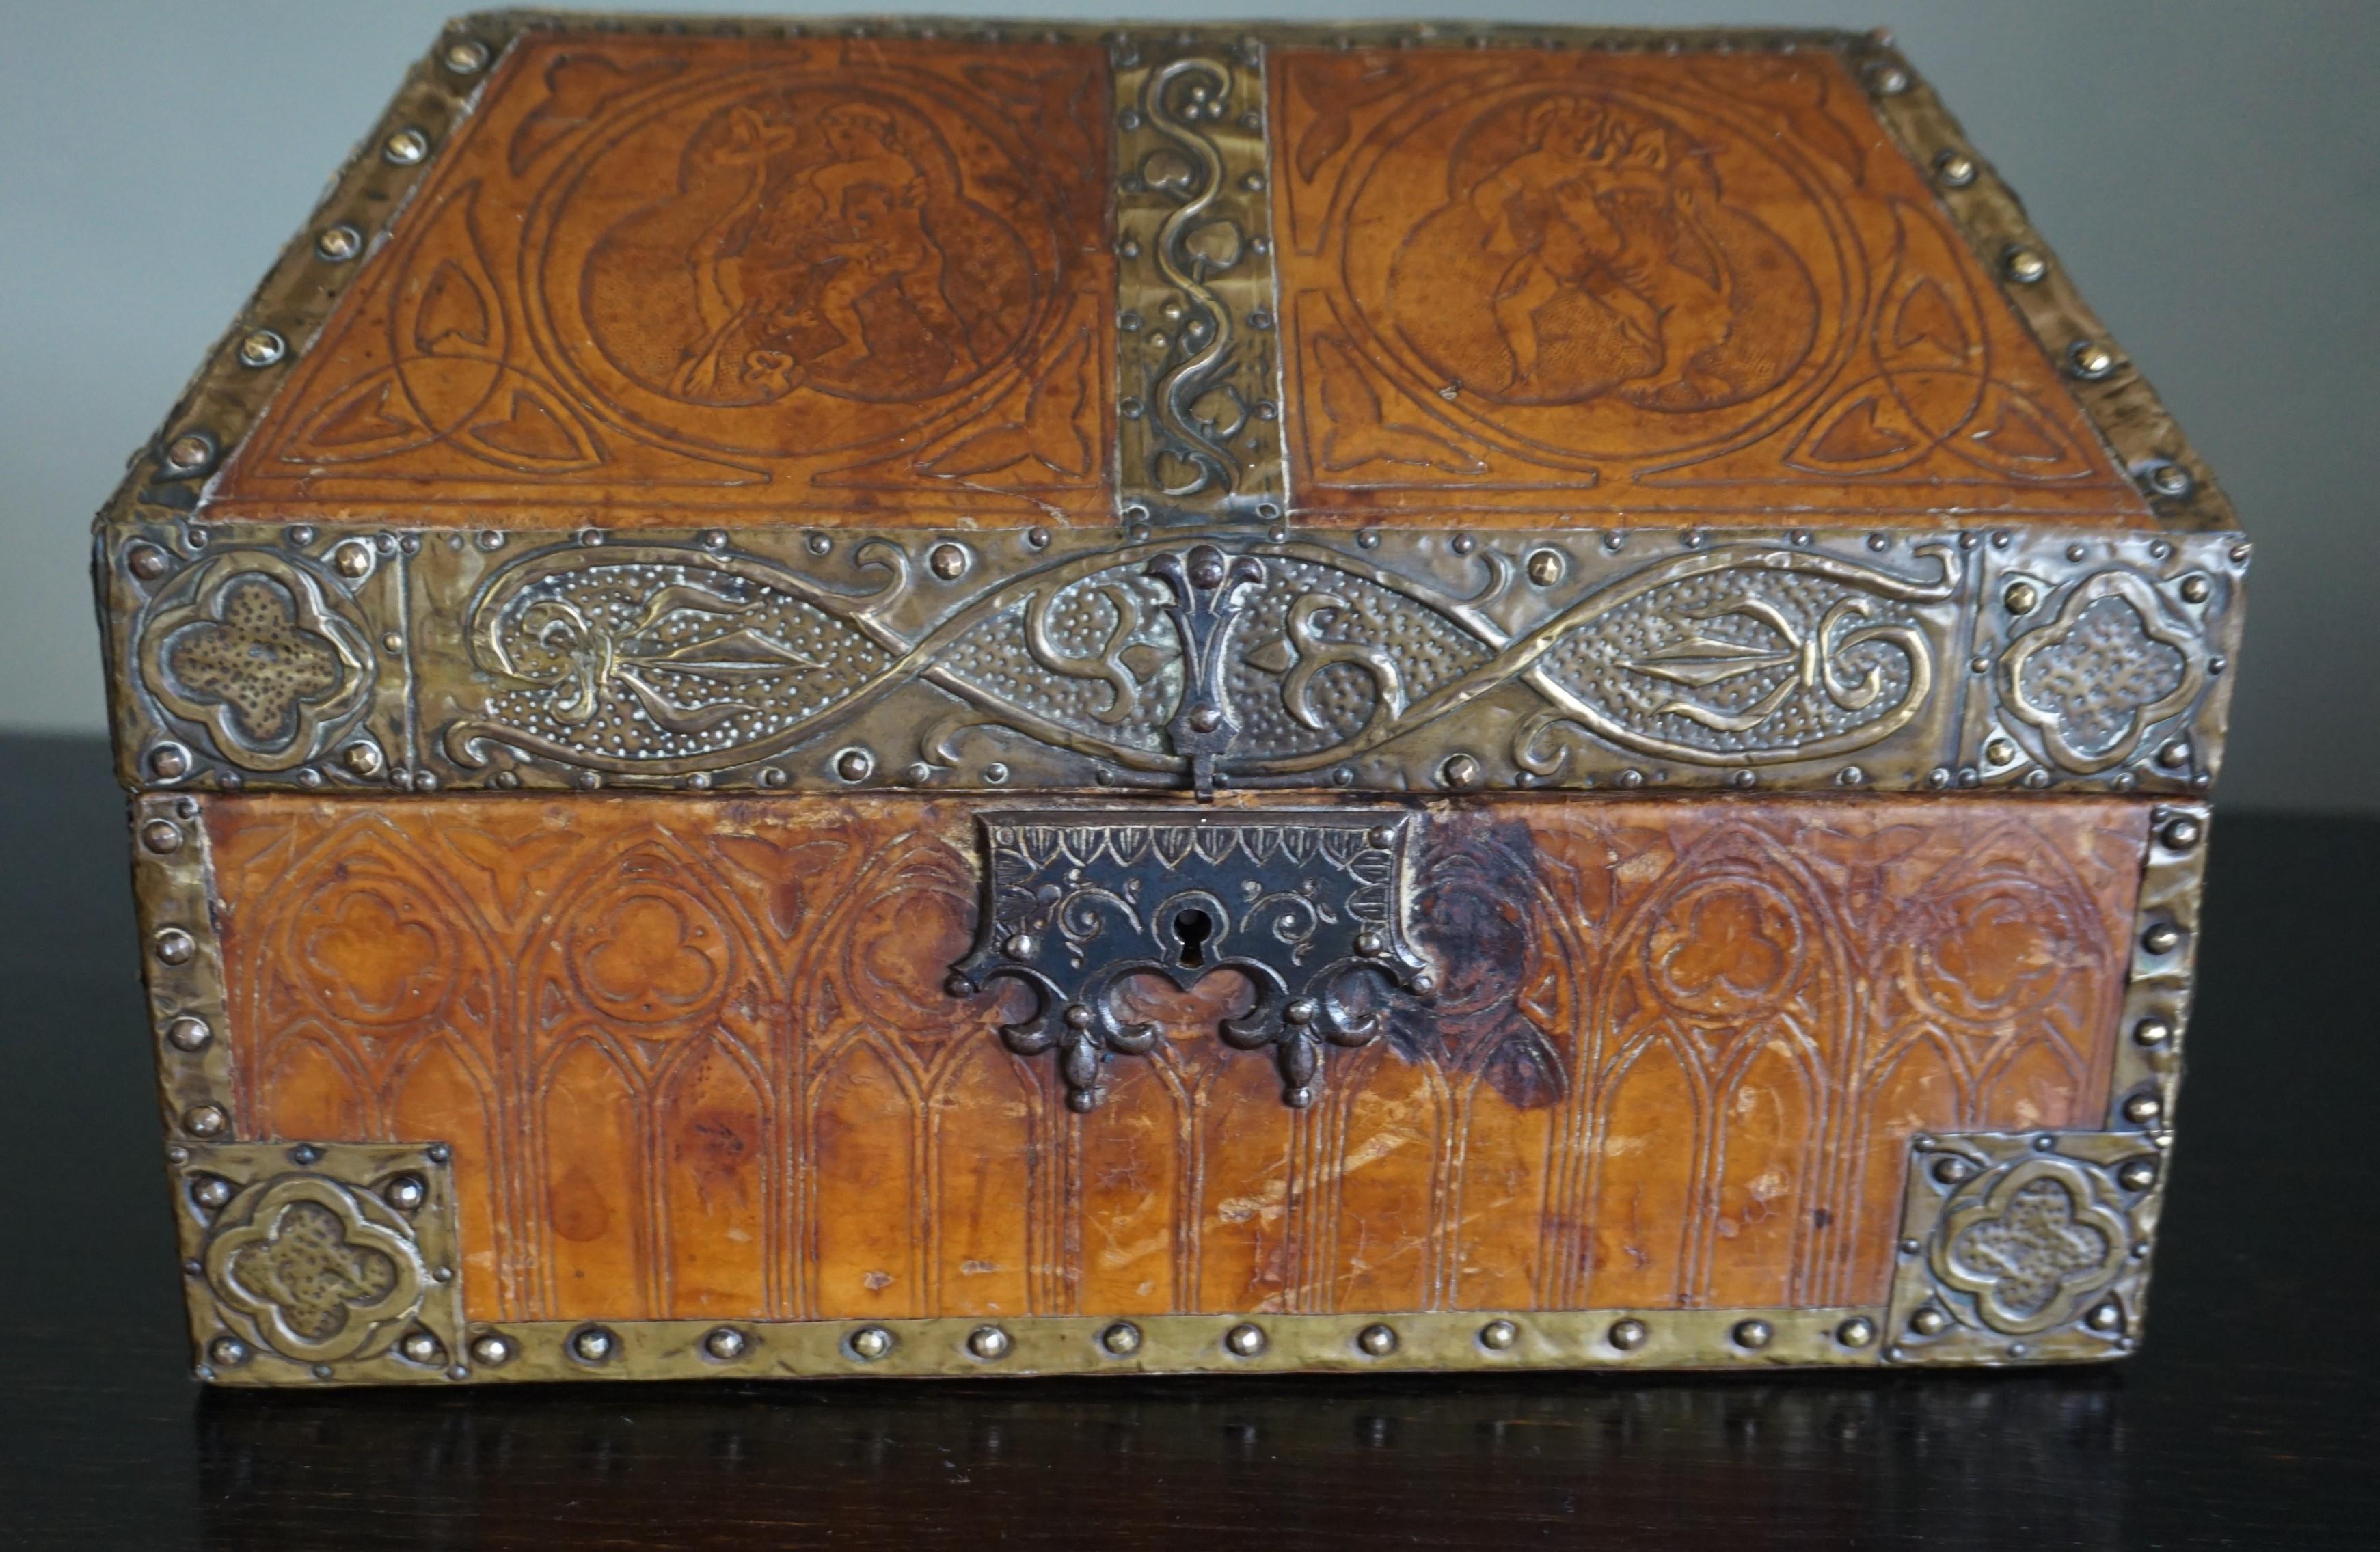 Beautiful and rare Gothic Revival box from France. 

If you are a collector of antique boxes or if you are looking for an extraordinary jewelry box to grace your vanity or dressing table then this quality made specimen in the Gothic Style could be